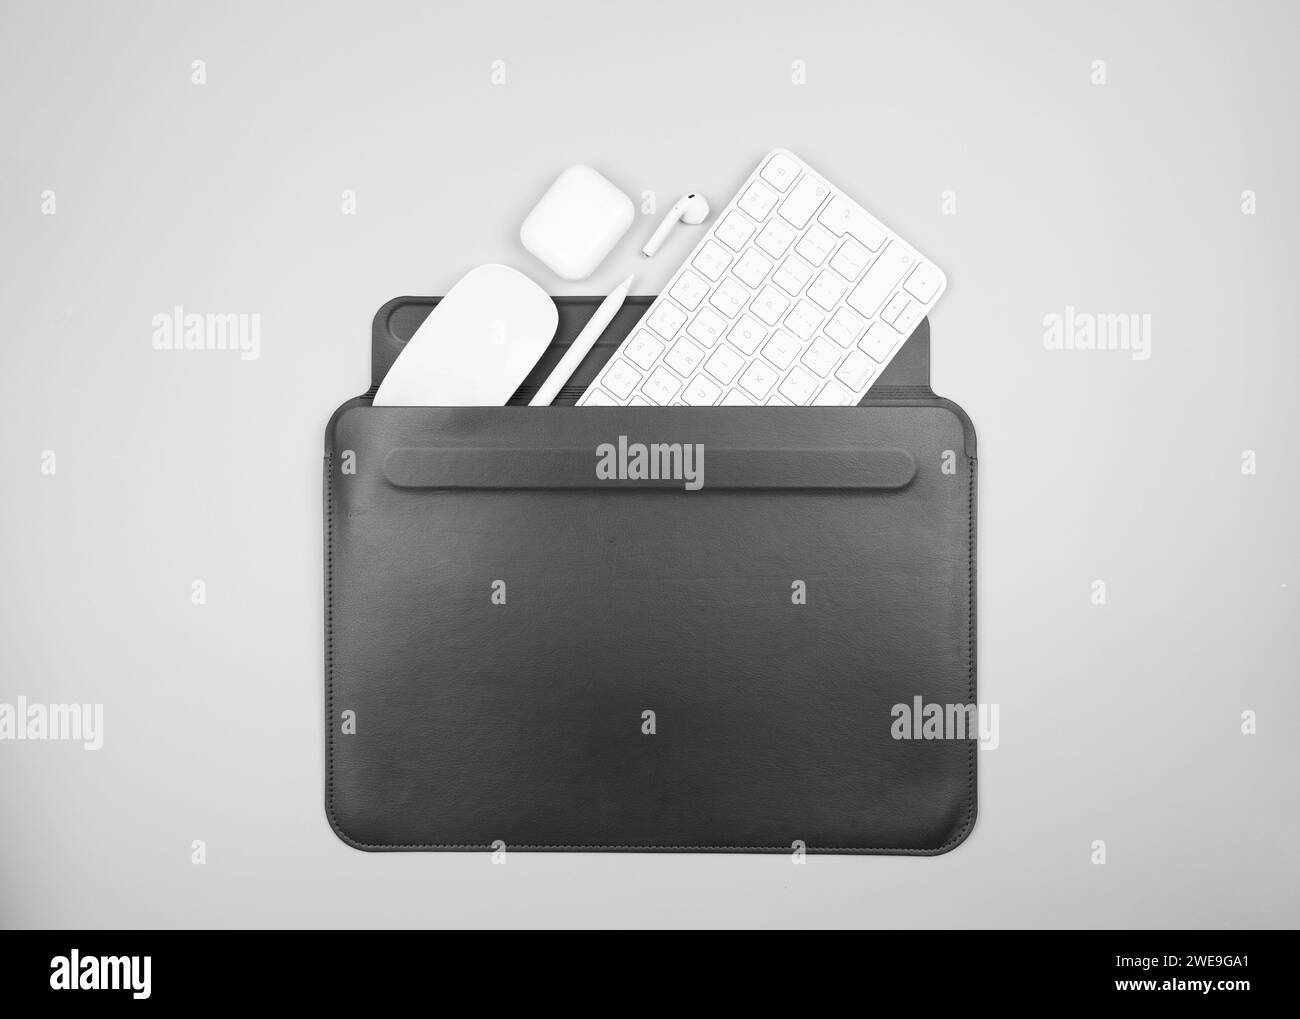 Top view of white keyboard, mouse, earphones case and pen on light grey background. Black laptop computer case flat lay, copy space. Stock Photo